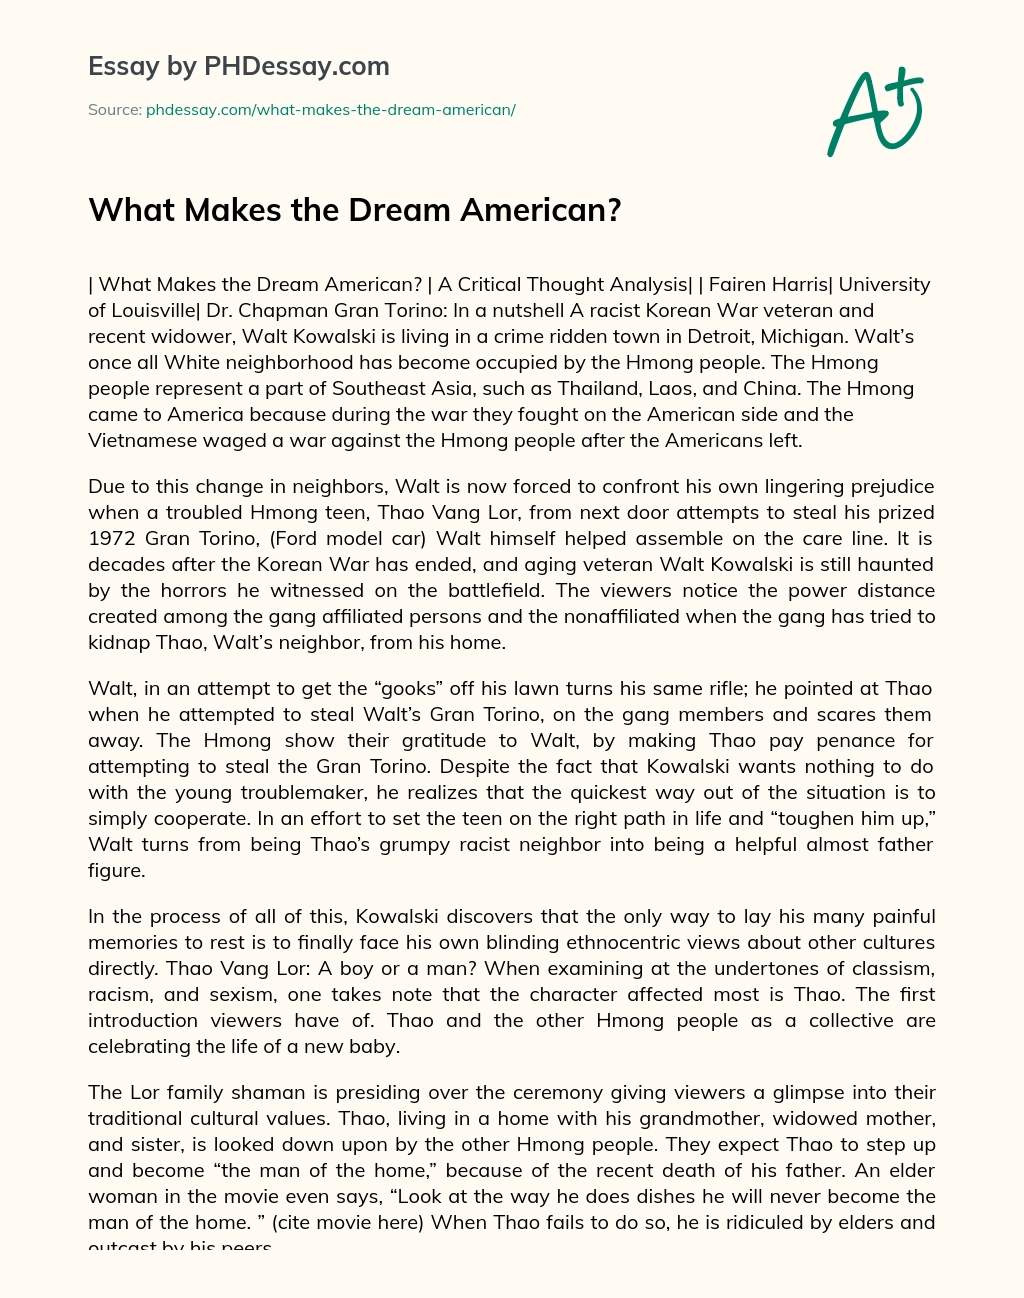 What Makes the Dream American? essay